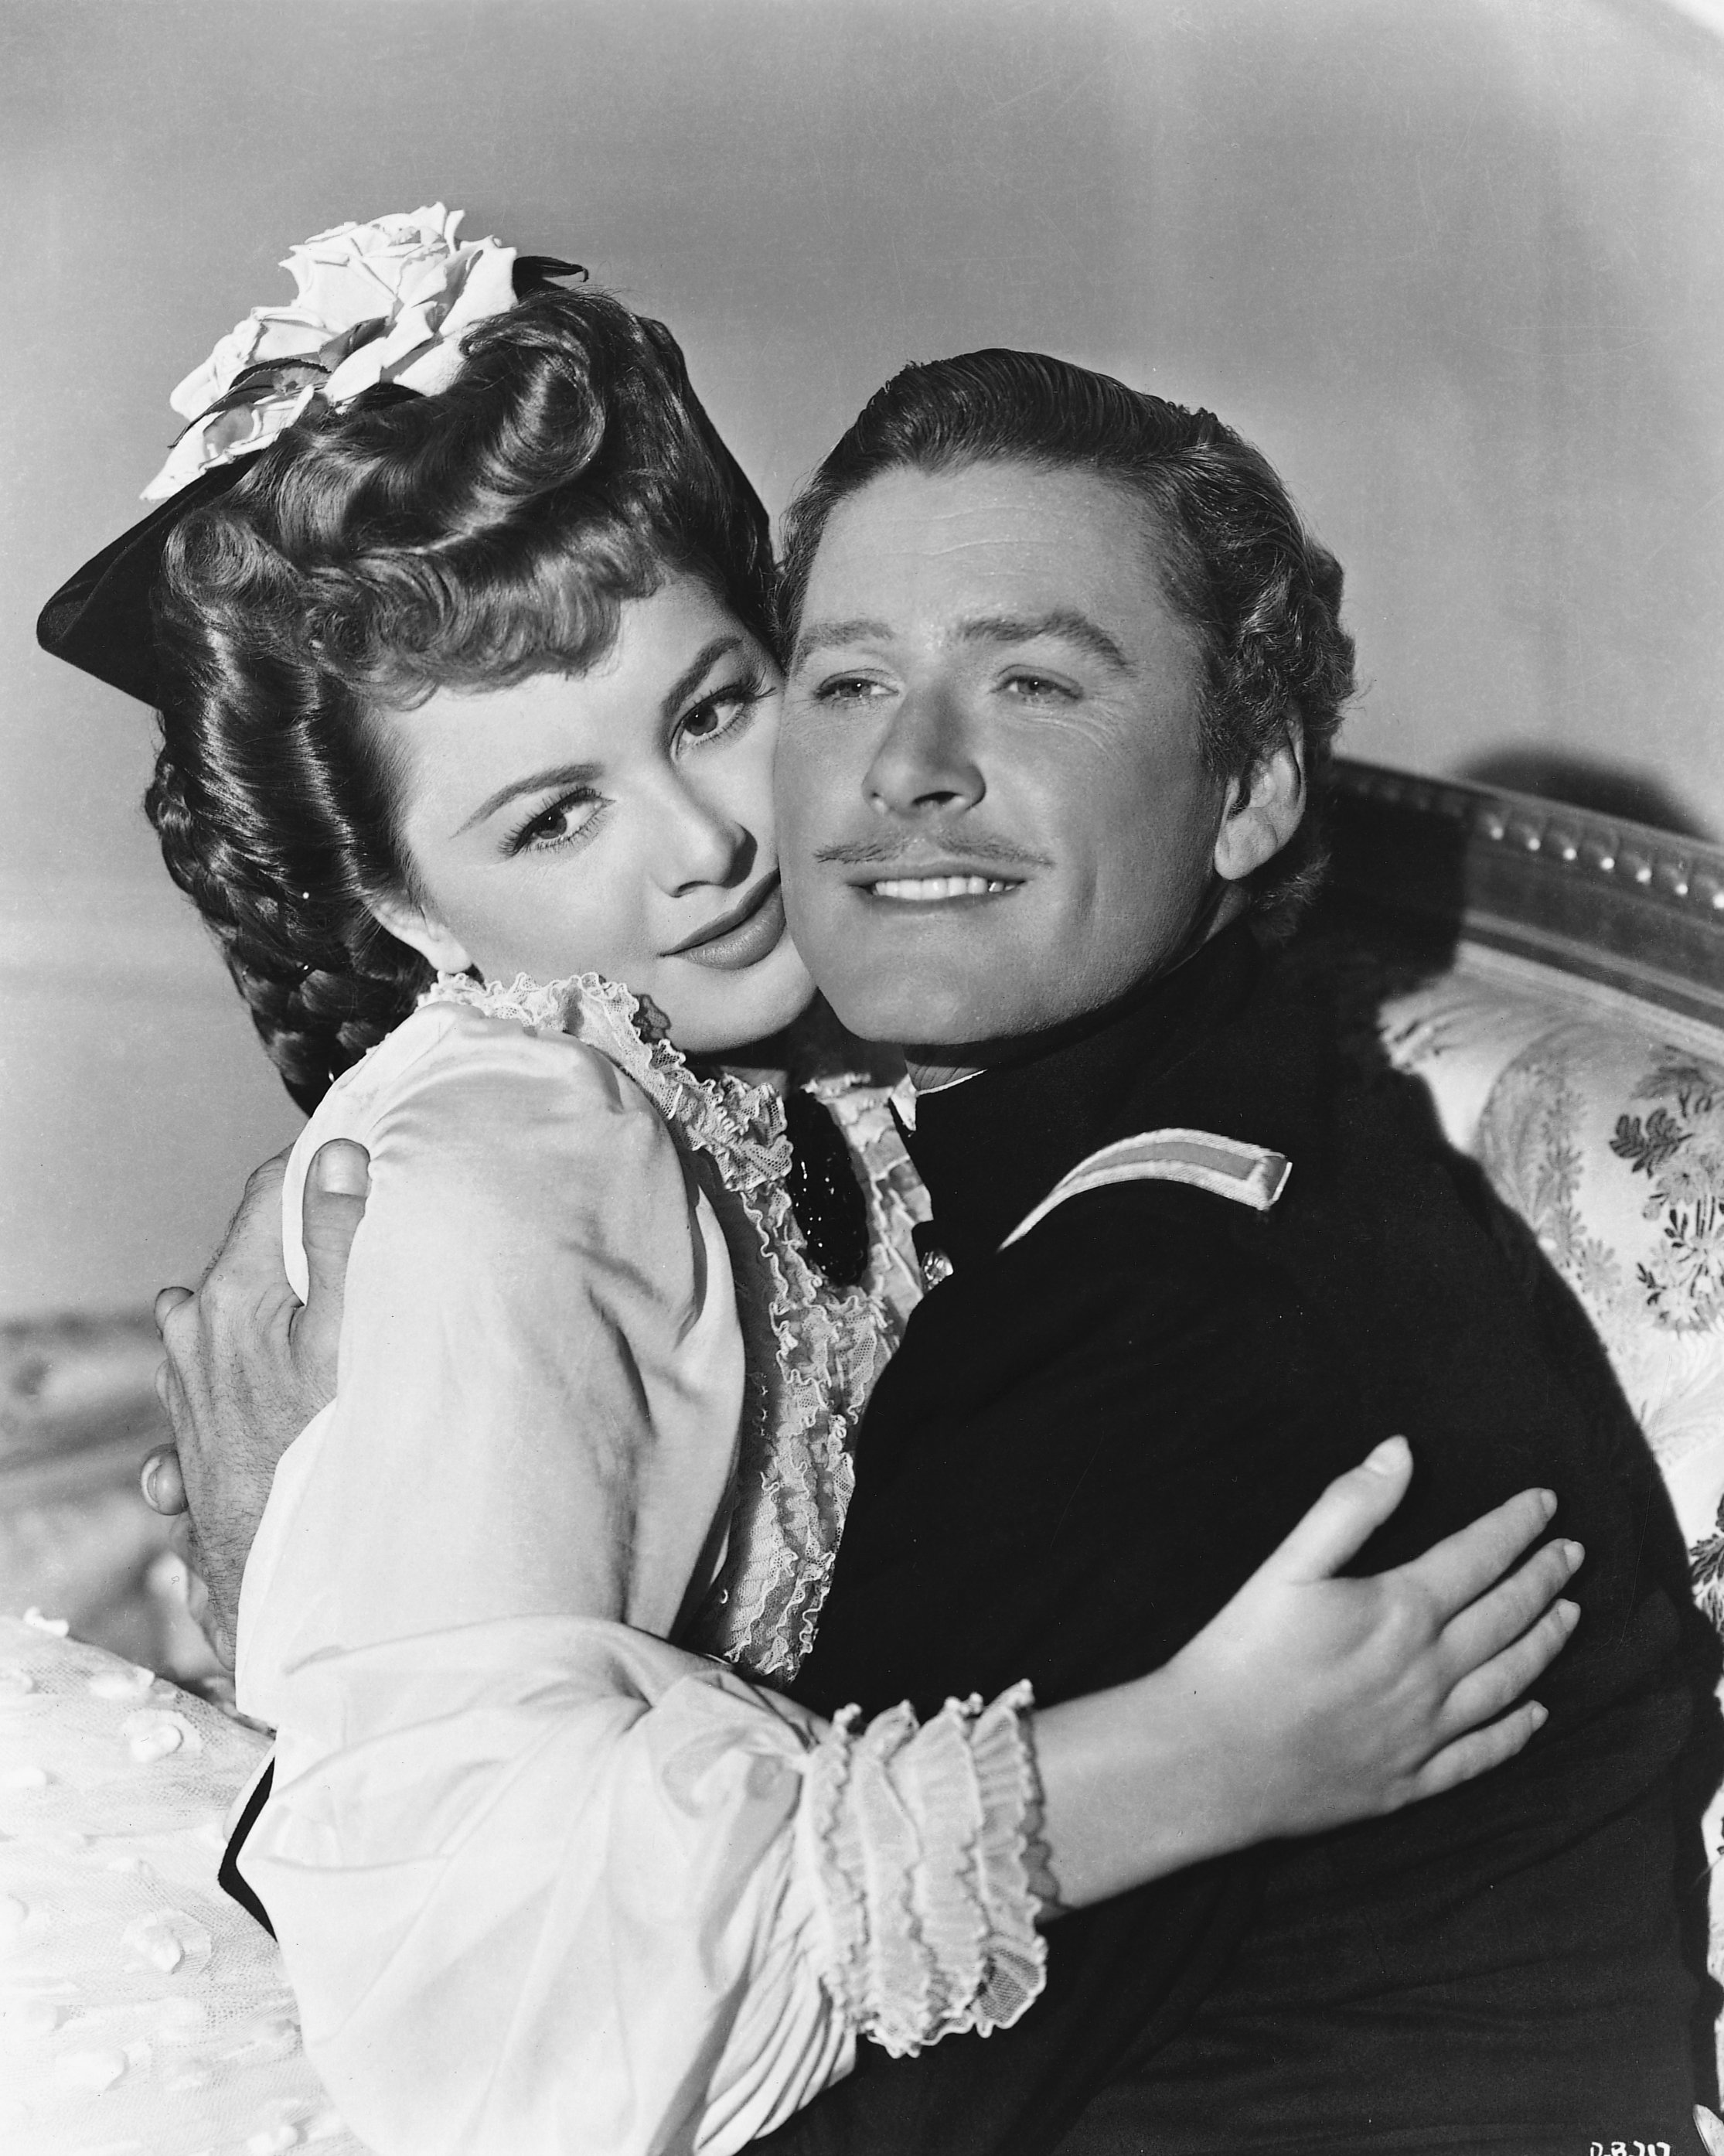 Errol Flynn and Olivia de Havilland in "They Died with Their Boots On," circa 1941. | Source: Silver Screen Collection/Getty Images